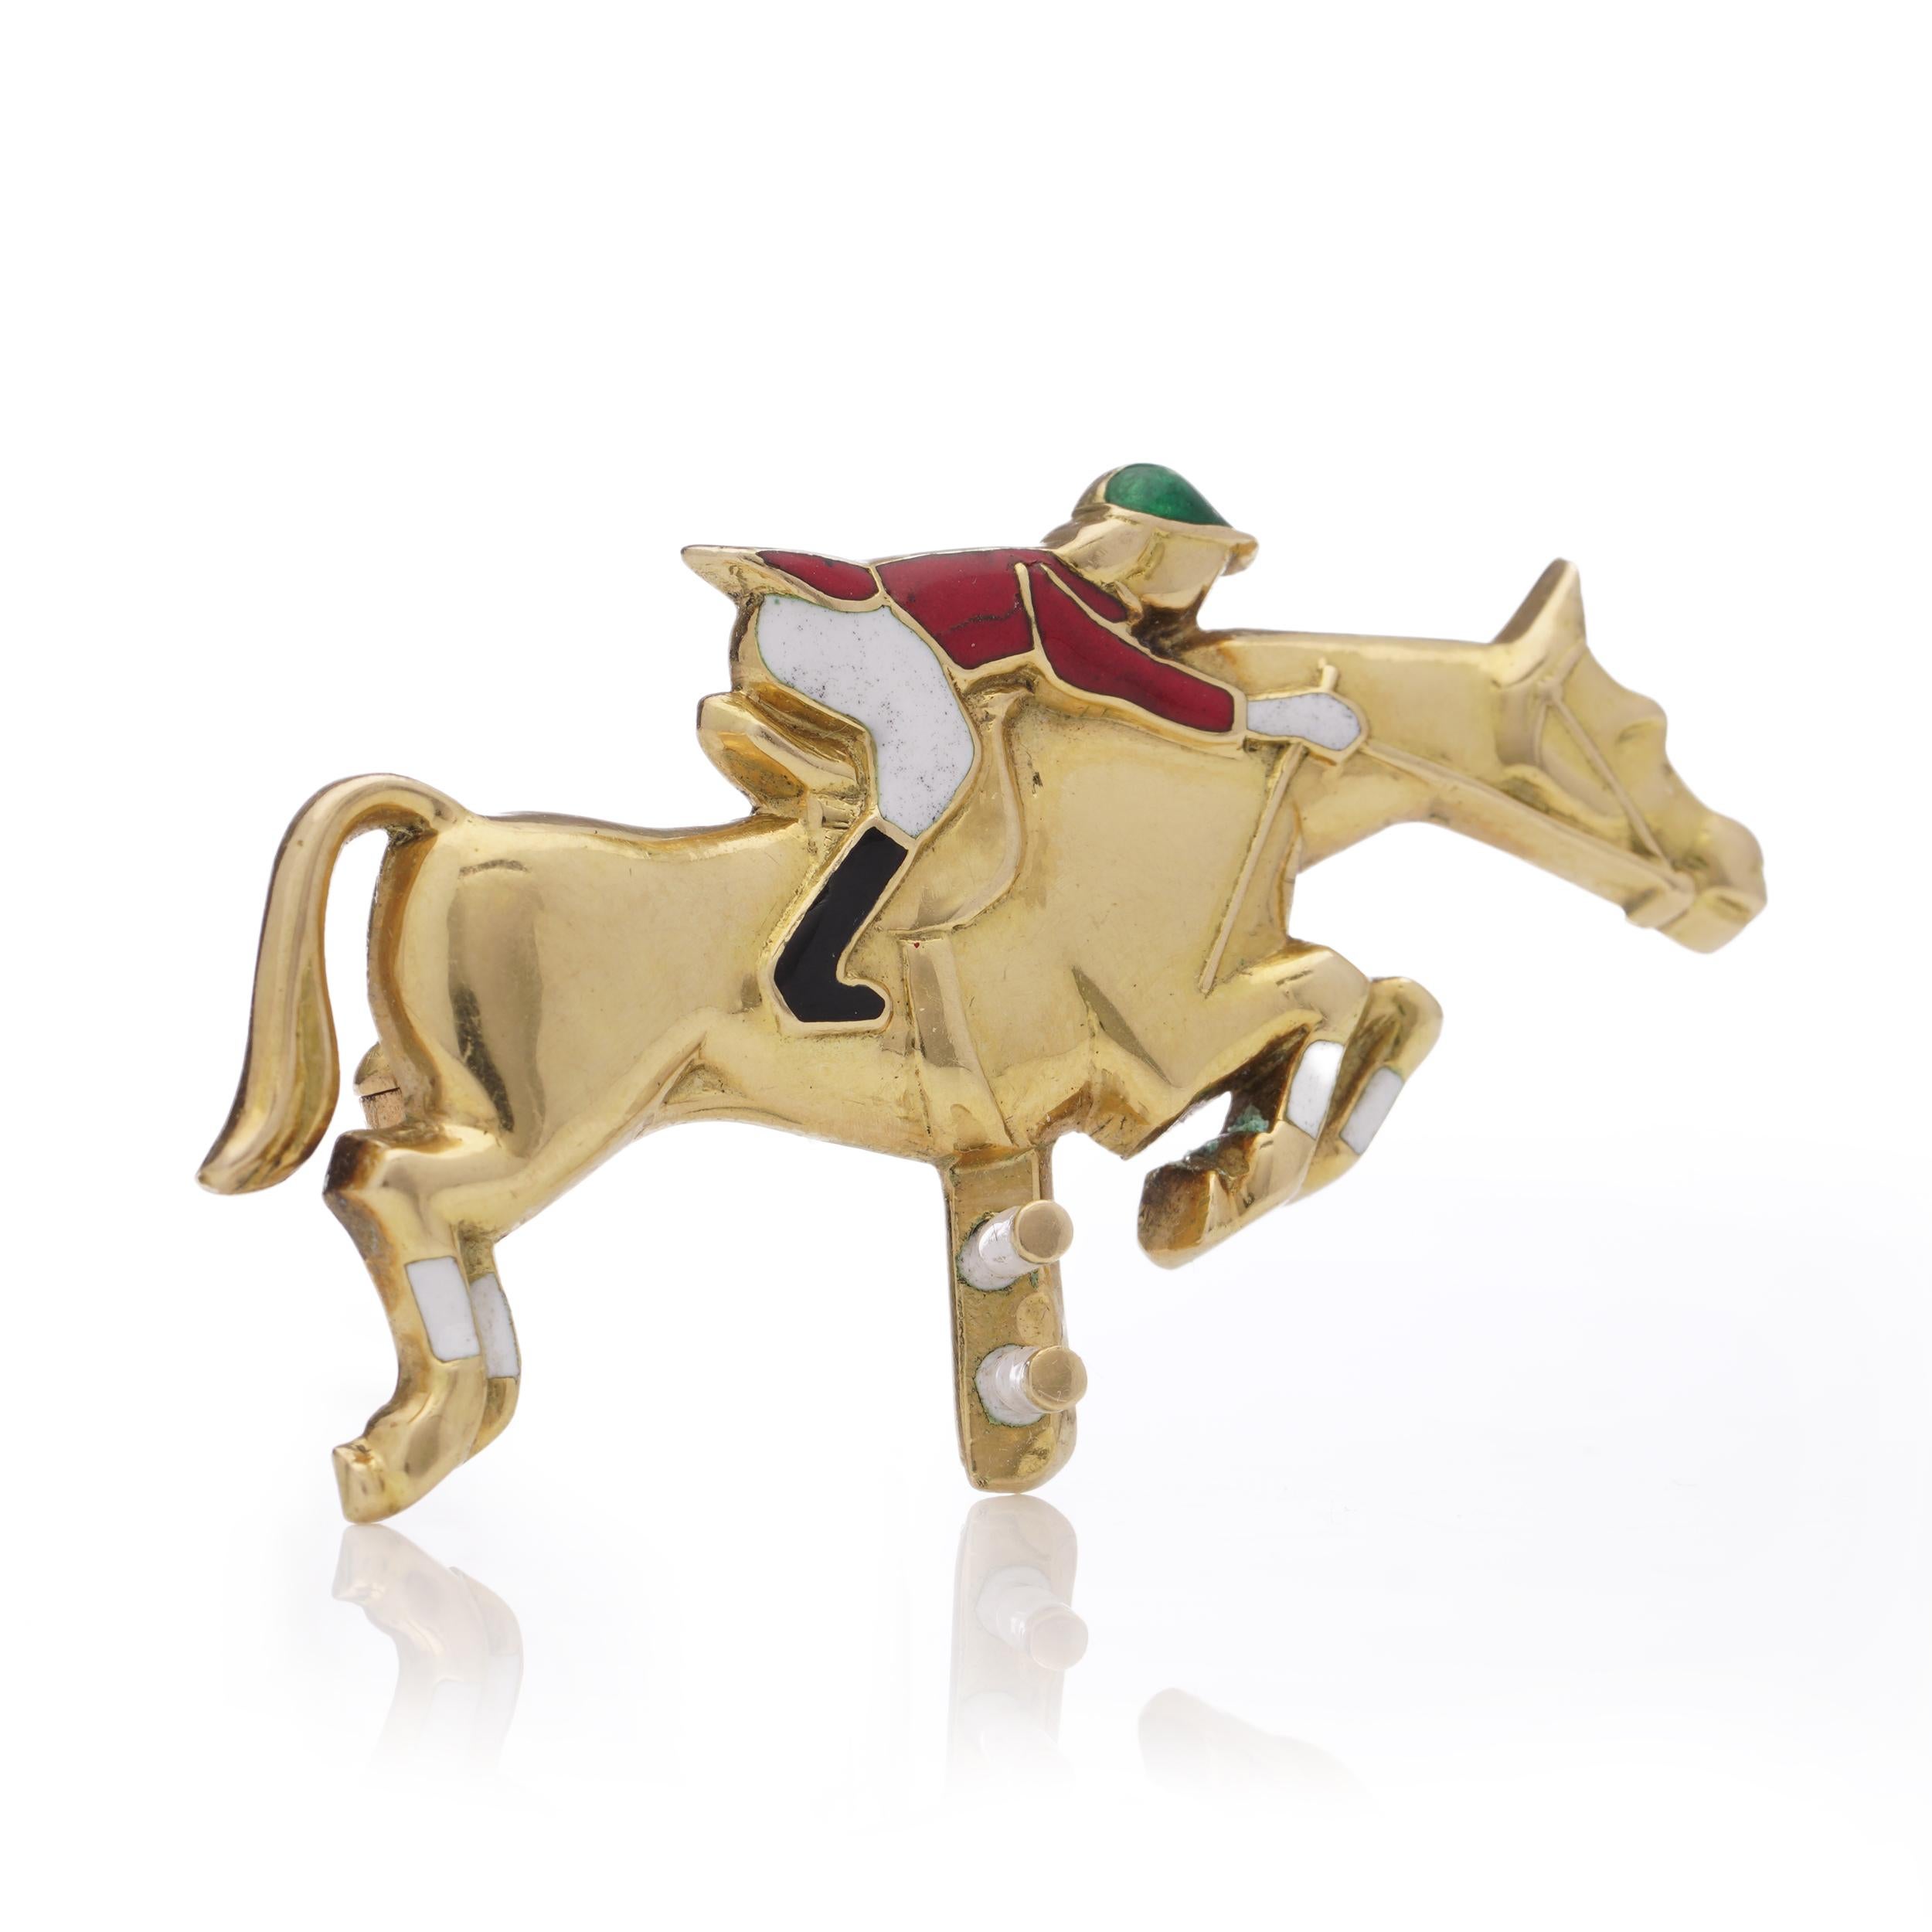 The Jacques Lacloche Paris Cannes brooch crafted from 18 kt. yellow gold and colourful enamel portrays a scene of a jockey and horse competing moment when the horse and rider overcome obstacles on the course, showcasing the skill and grace of the